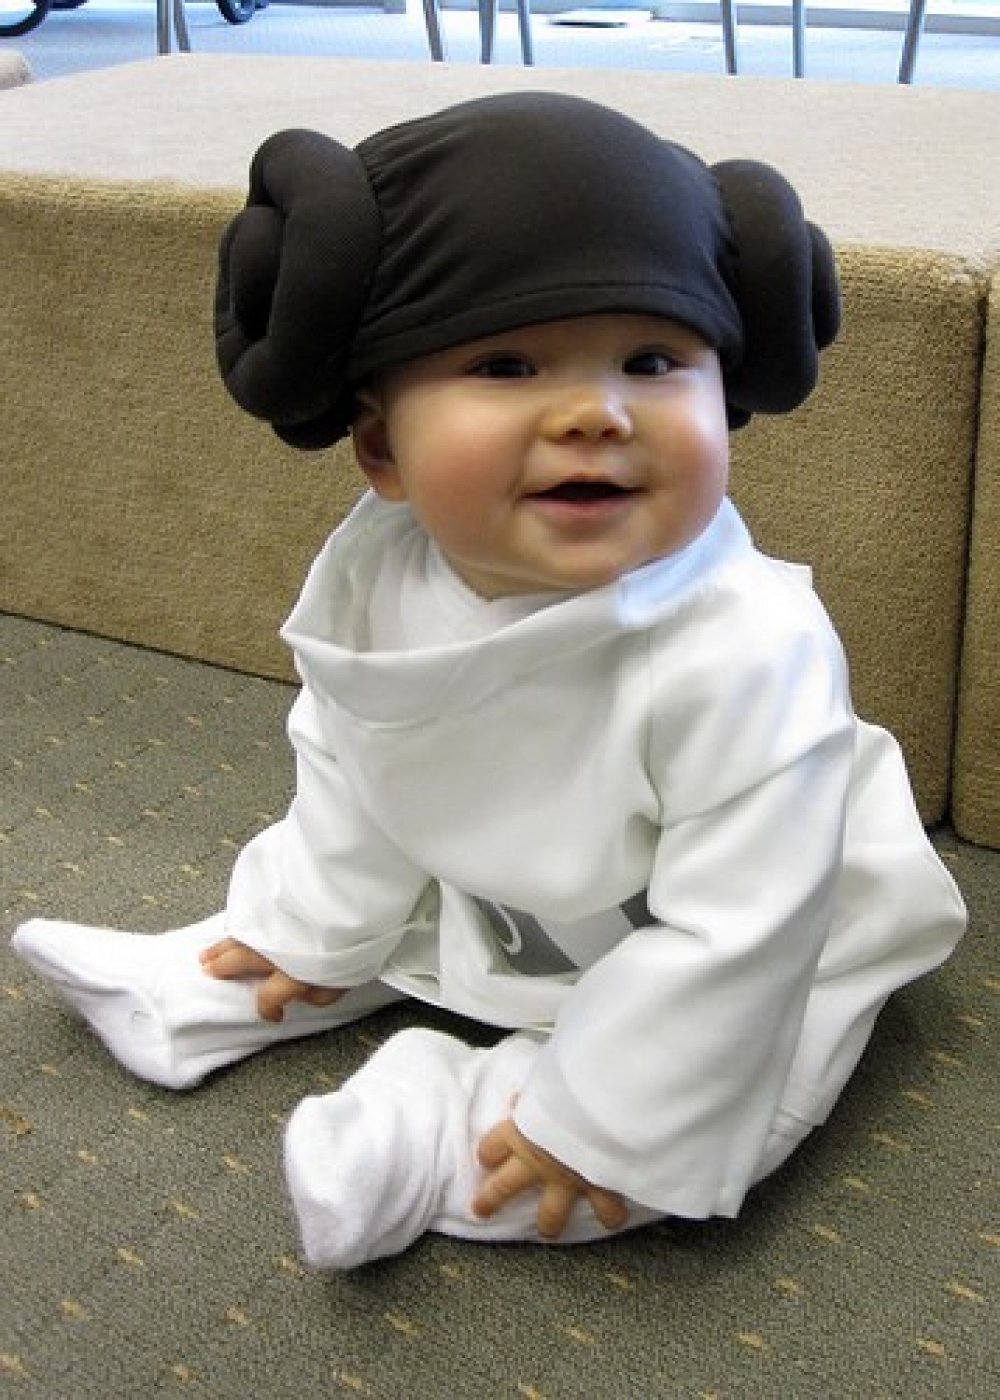 Princess-Leia-Costumes-Pictures-7.